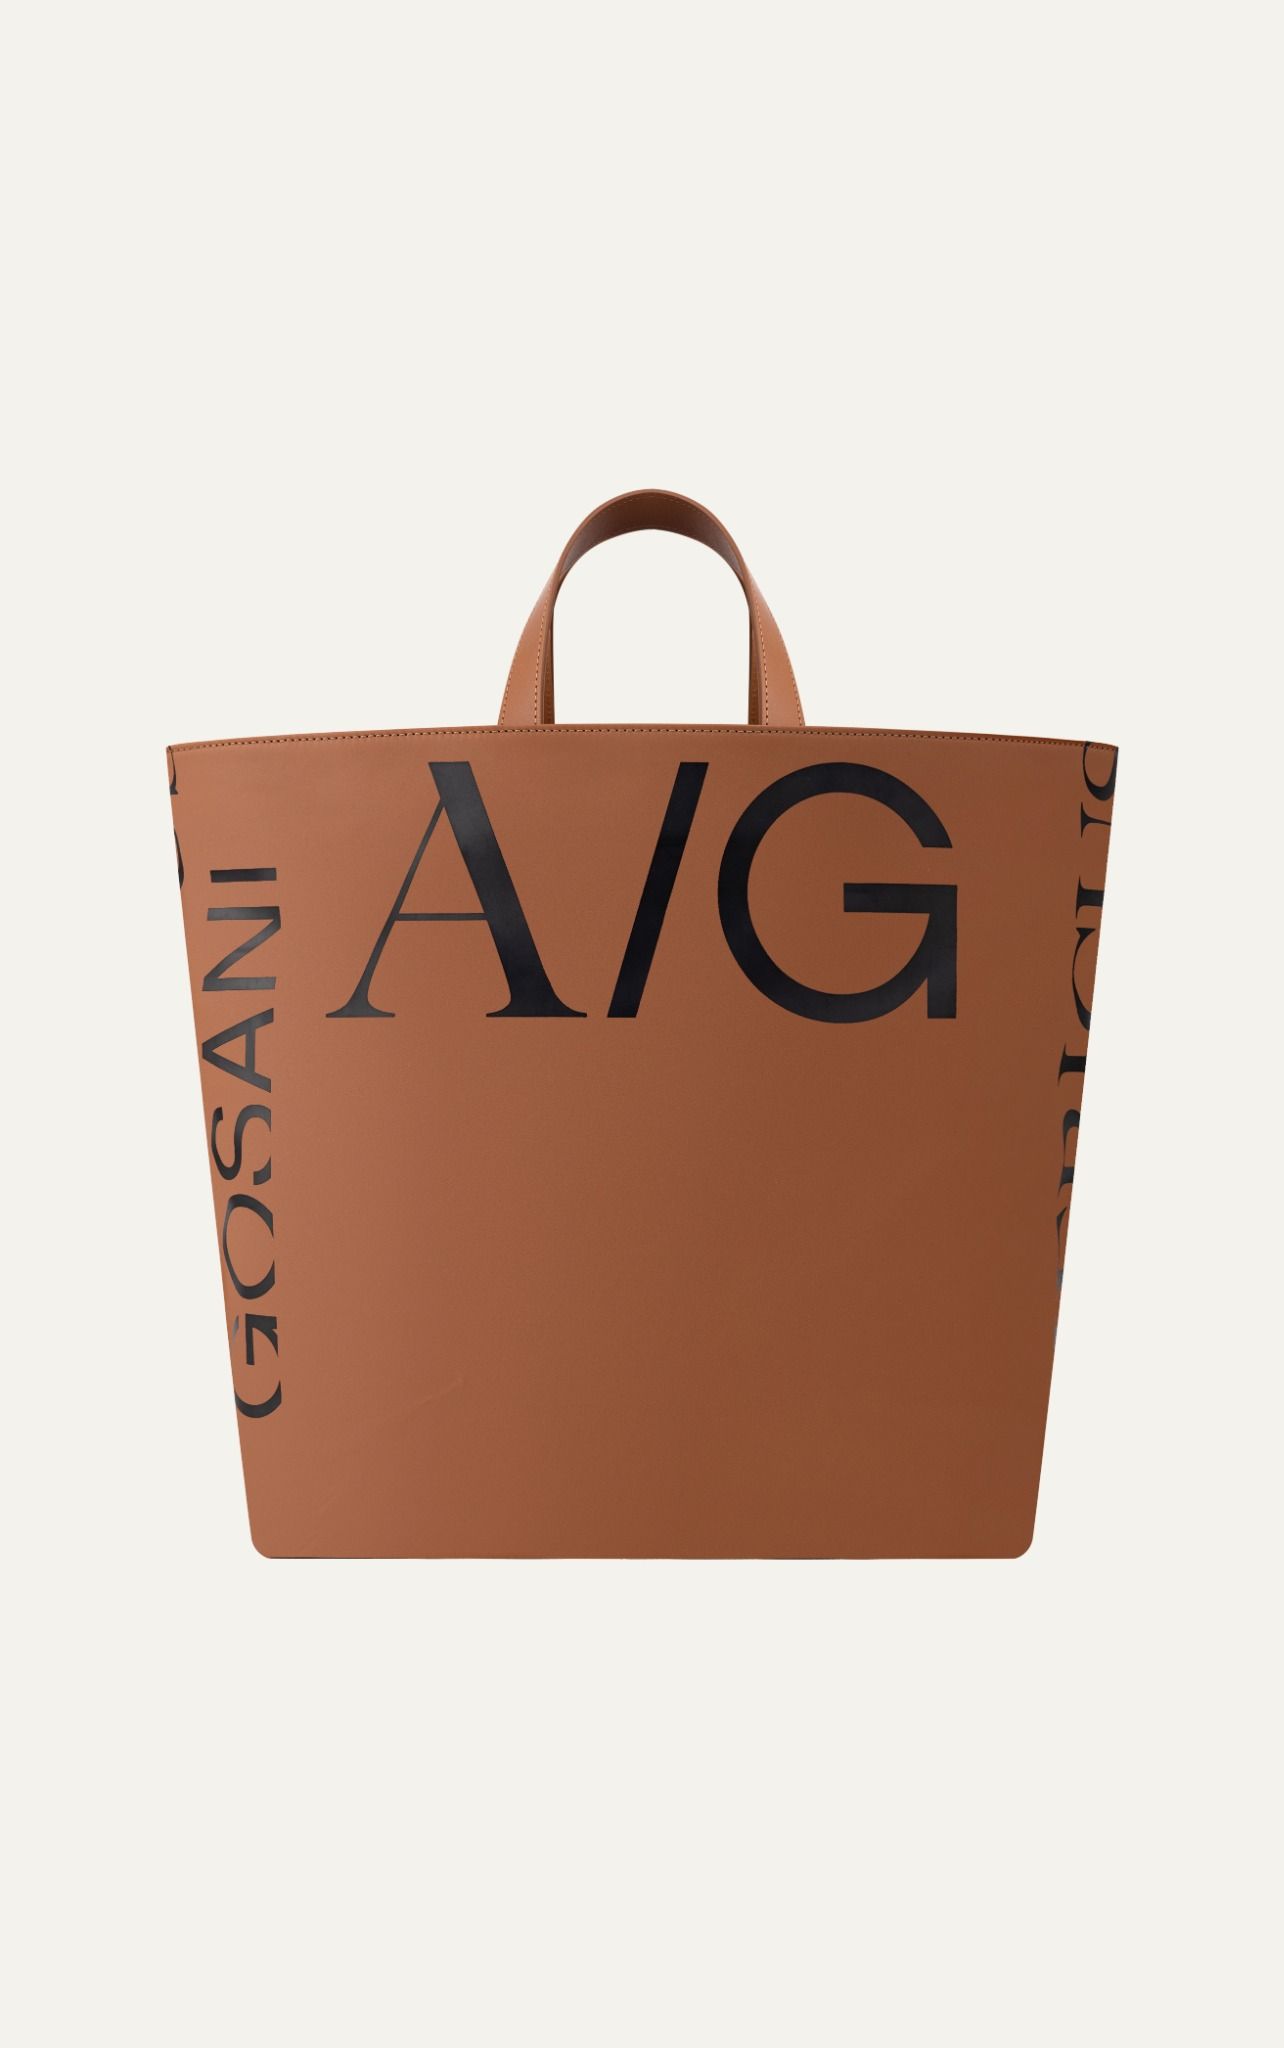  A/G NEW SIGNATURE BAG IN BROWN 